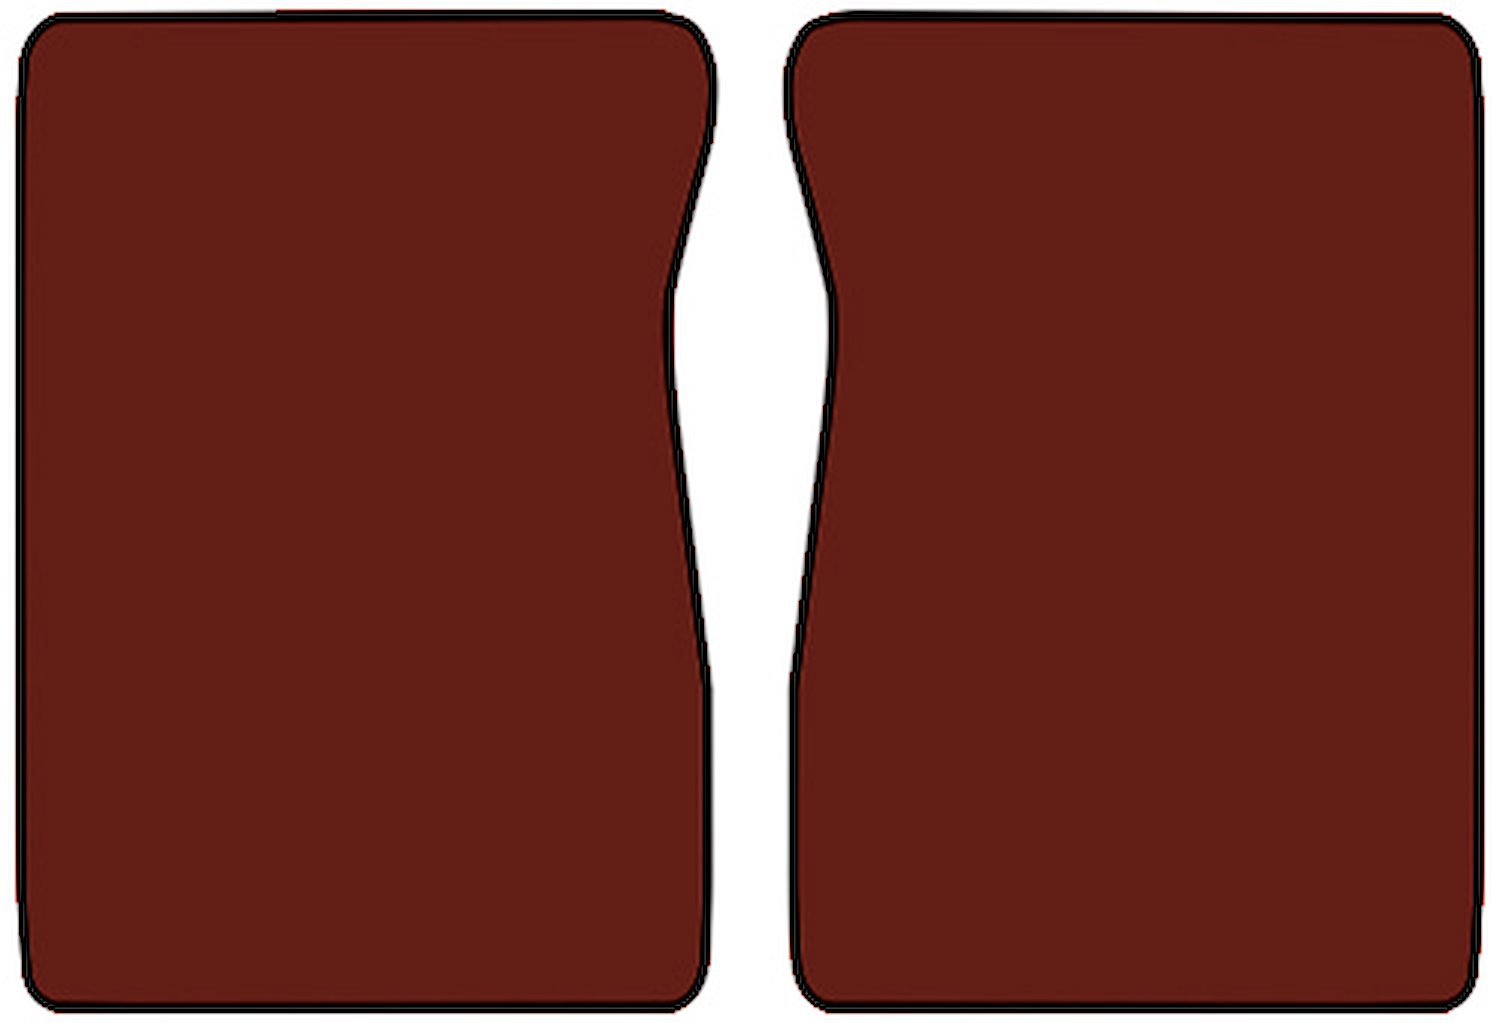 Molded Cut Pile Floor Mats for 1981-1986 C/K Series Chevrolet and GMC Trucks [2-Piece, Automatic/4-Speed, Maple]